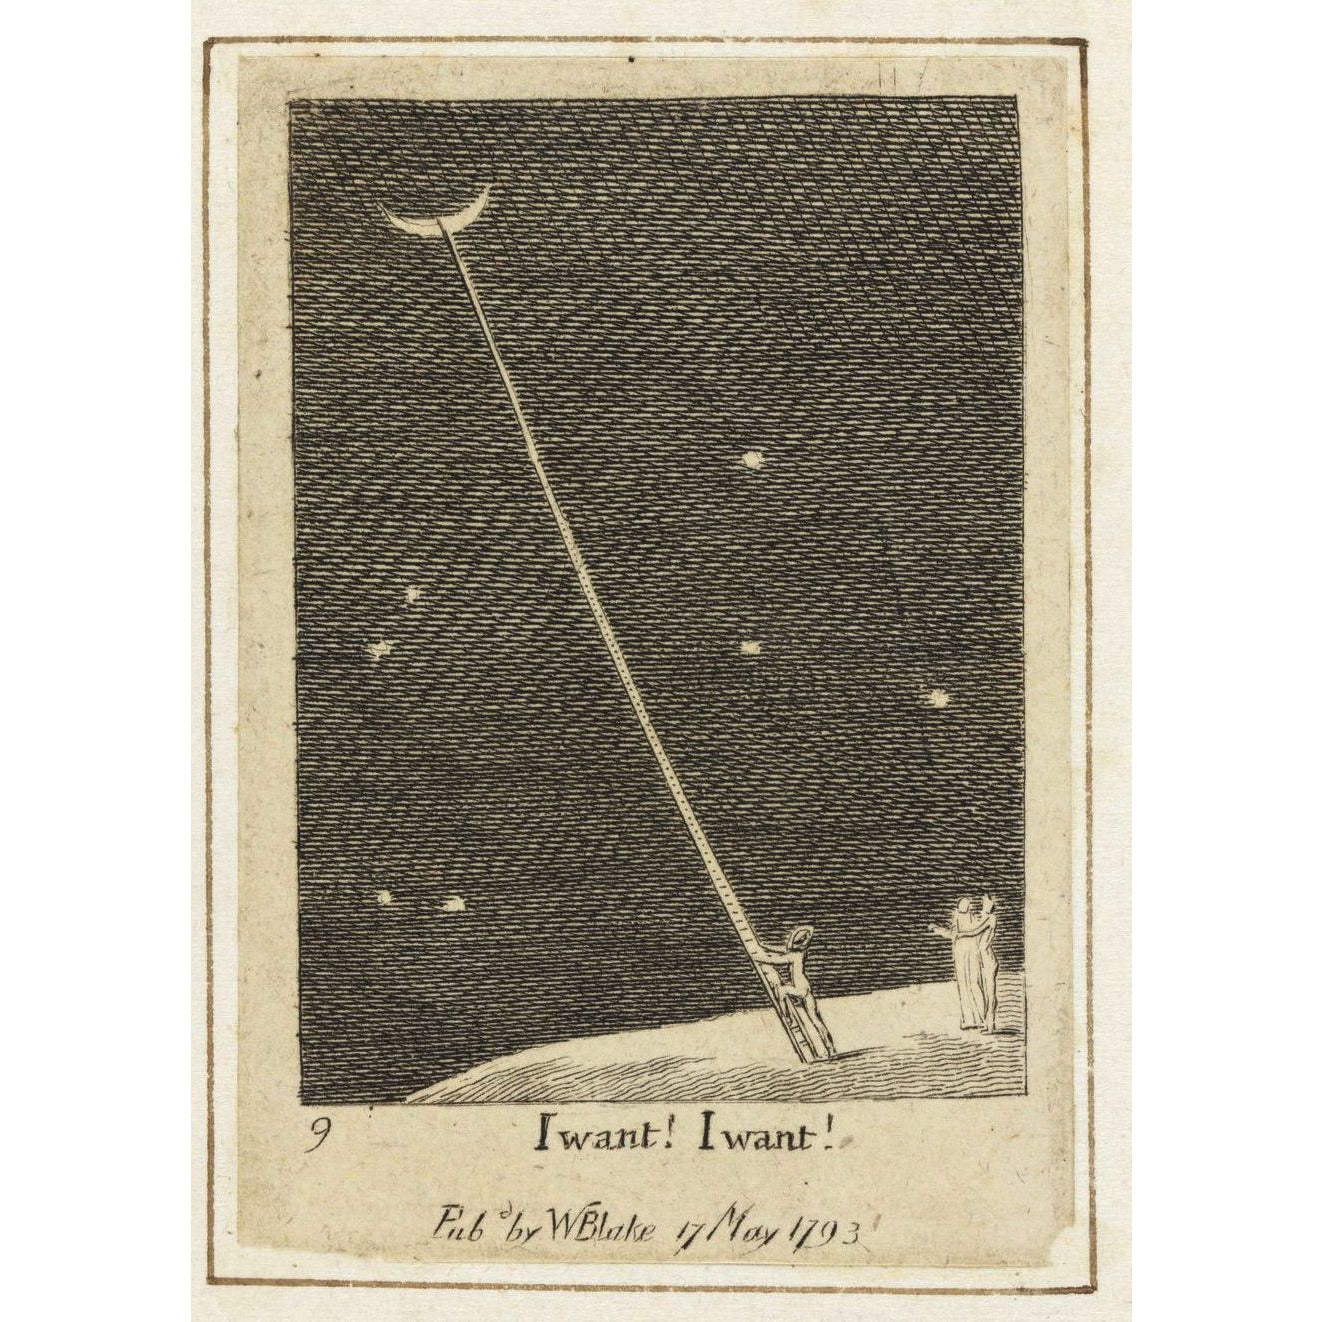 Greeting card - I Want! I Want! by William Blake. Print with a character ascending a ladder to the moon. From the collection of The Fitzwilliam Museum, brought to you by CuratingCambridge.com